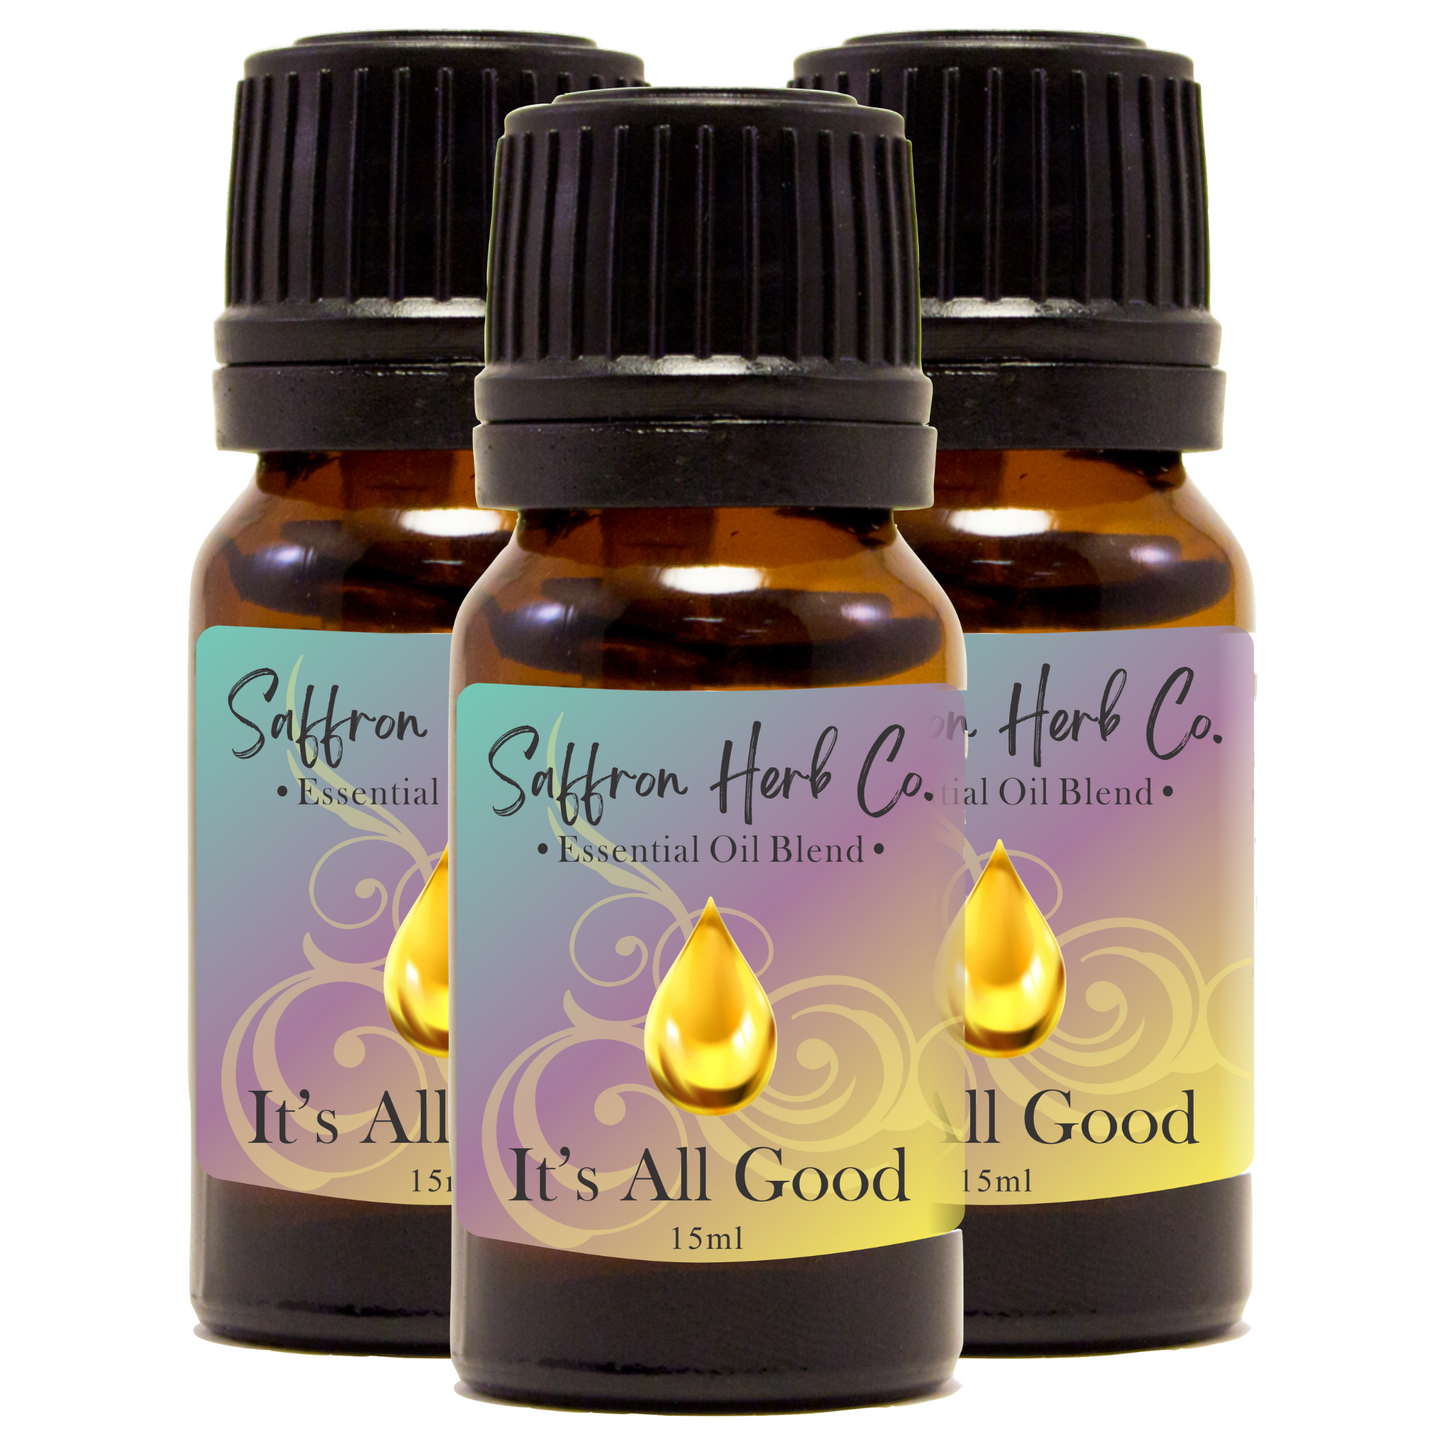 It's All Good™ Essential Oil Blend